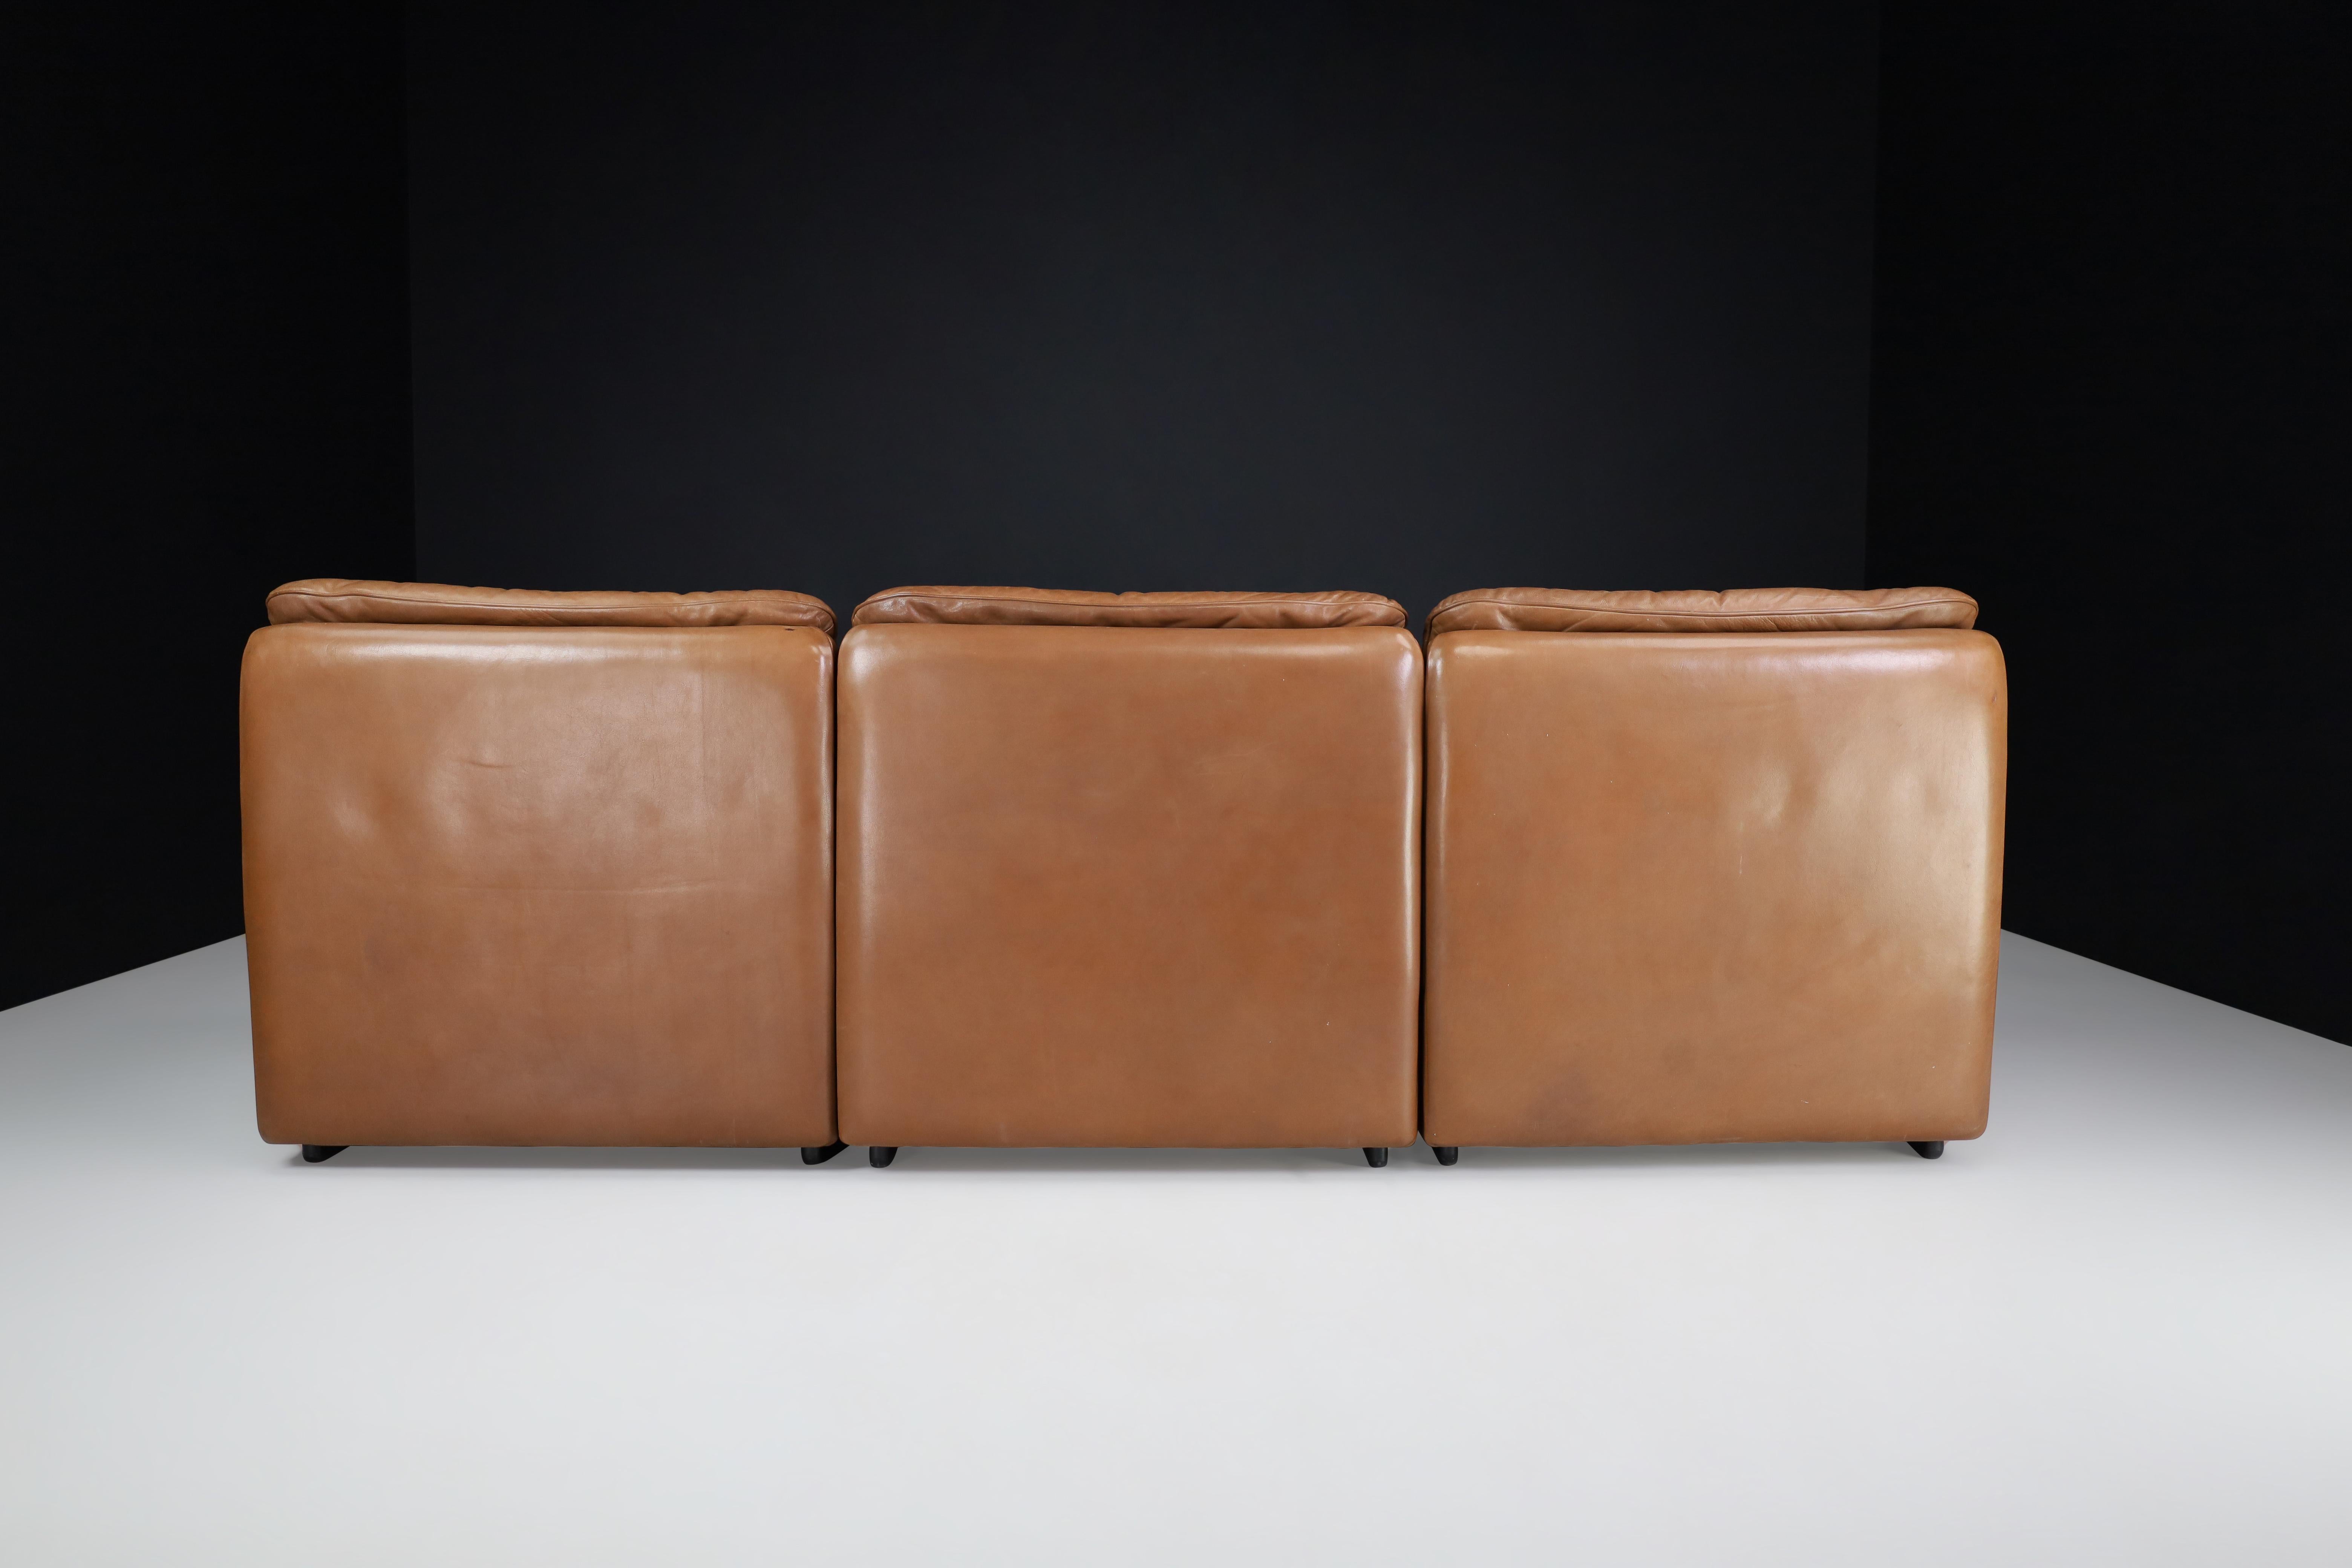 De Sede Ds 63 Three-Seater Sofa in Patinated Leather, Switzerland, 1970s For Sale 2